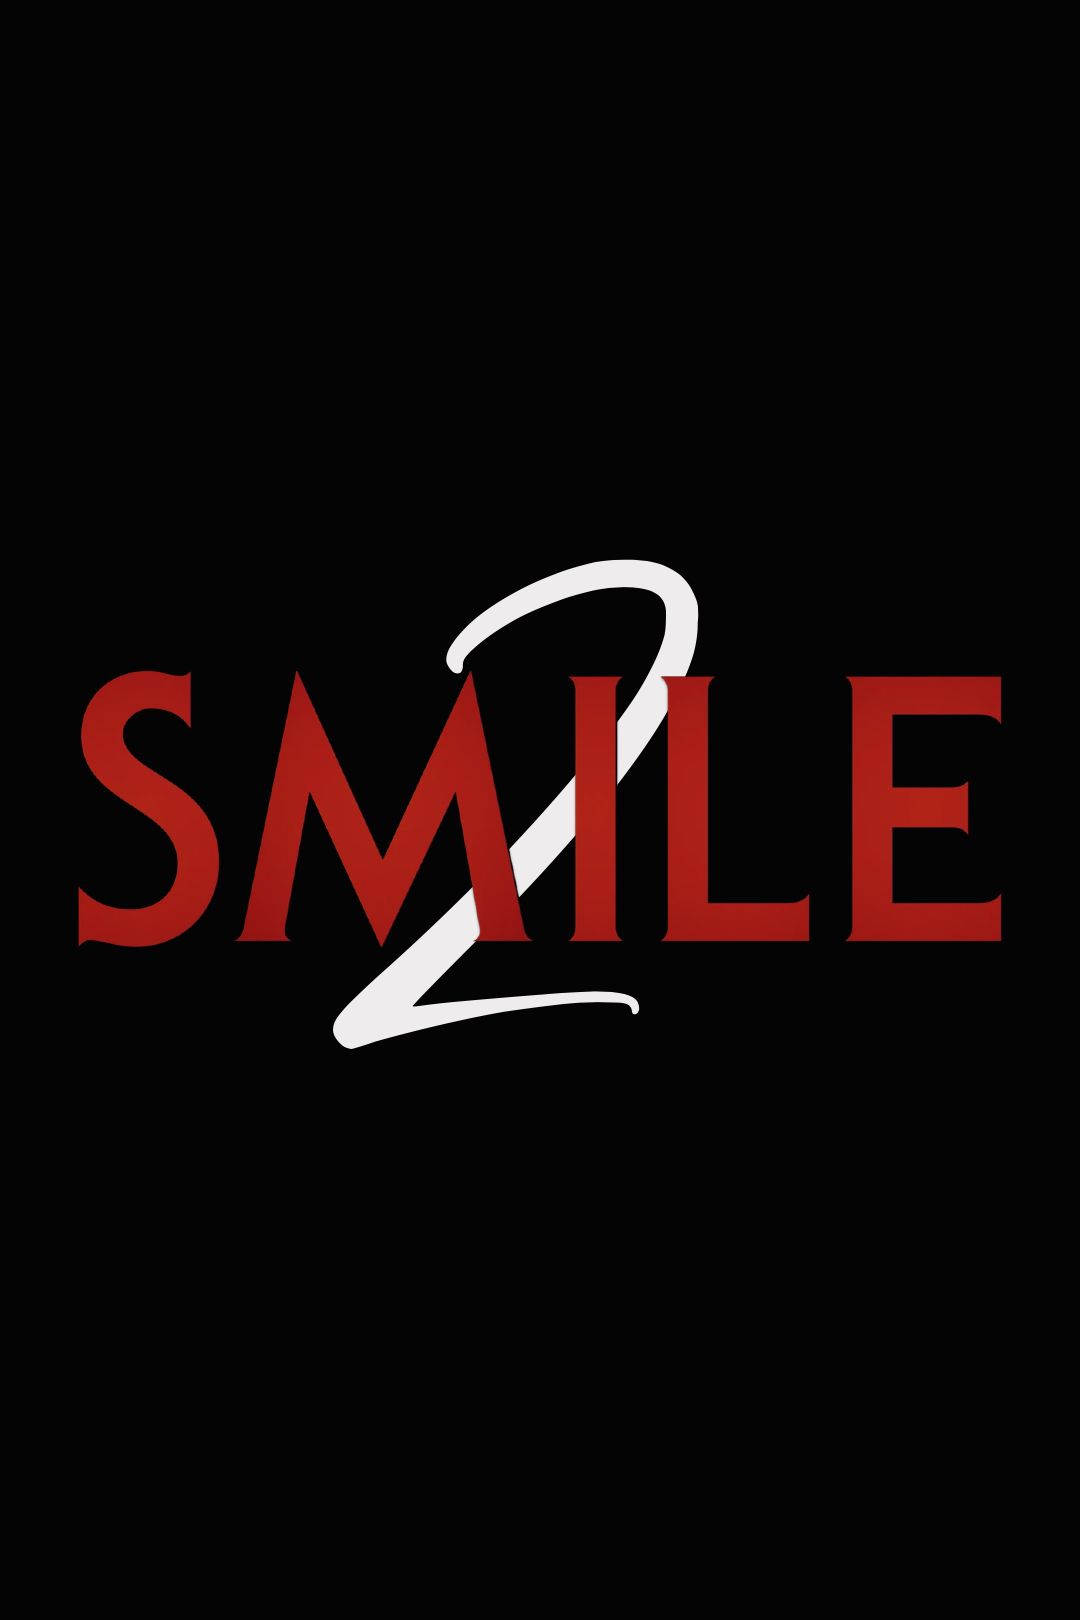 Smile 2 Return Gets Disappointing Update From Og Horror Movie Star